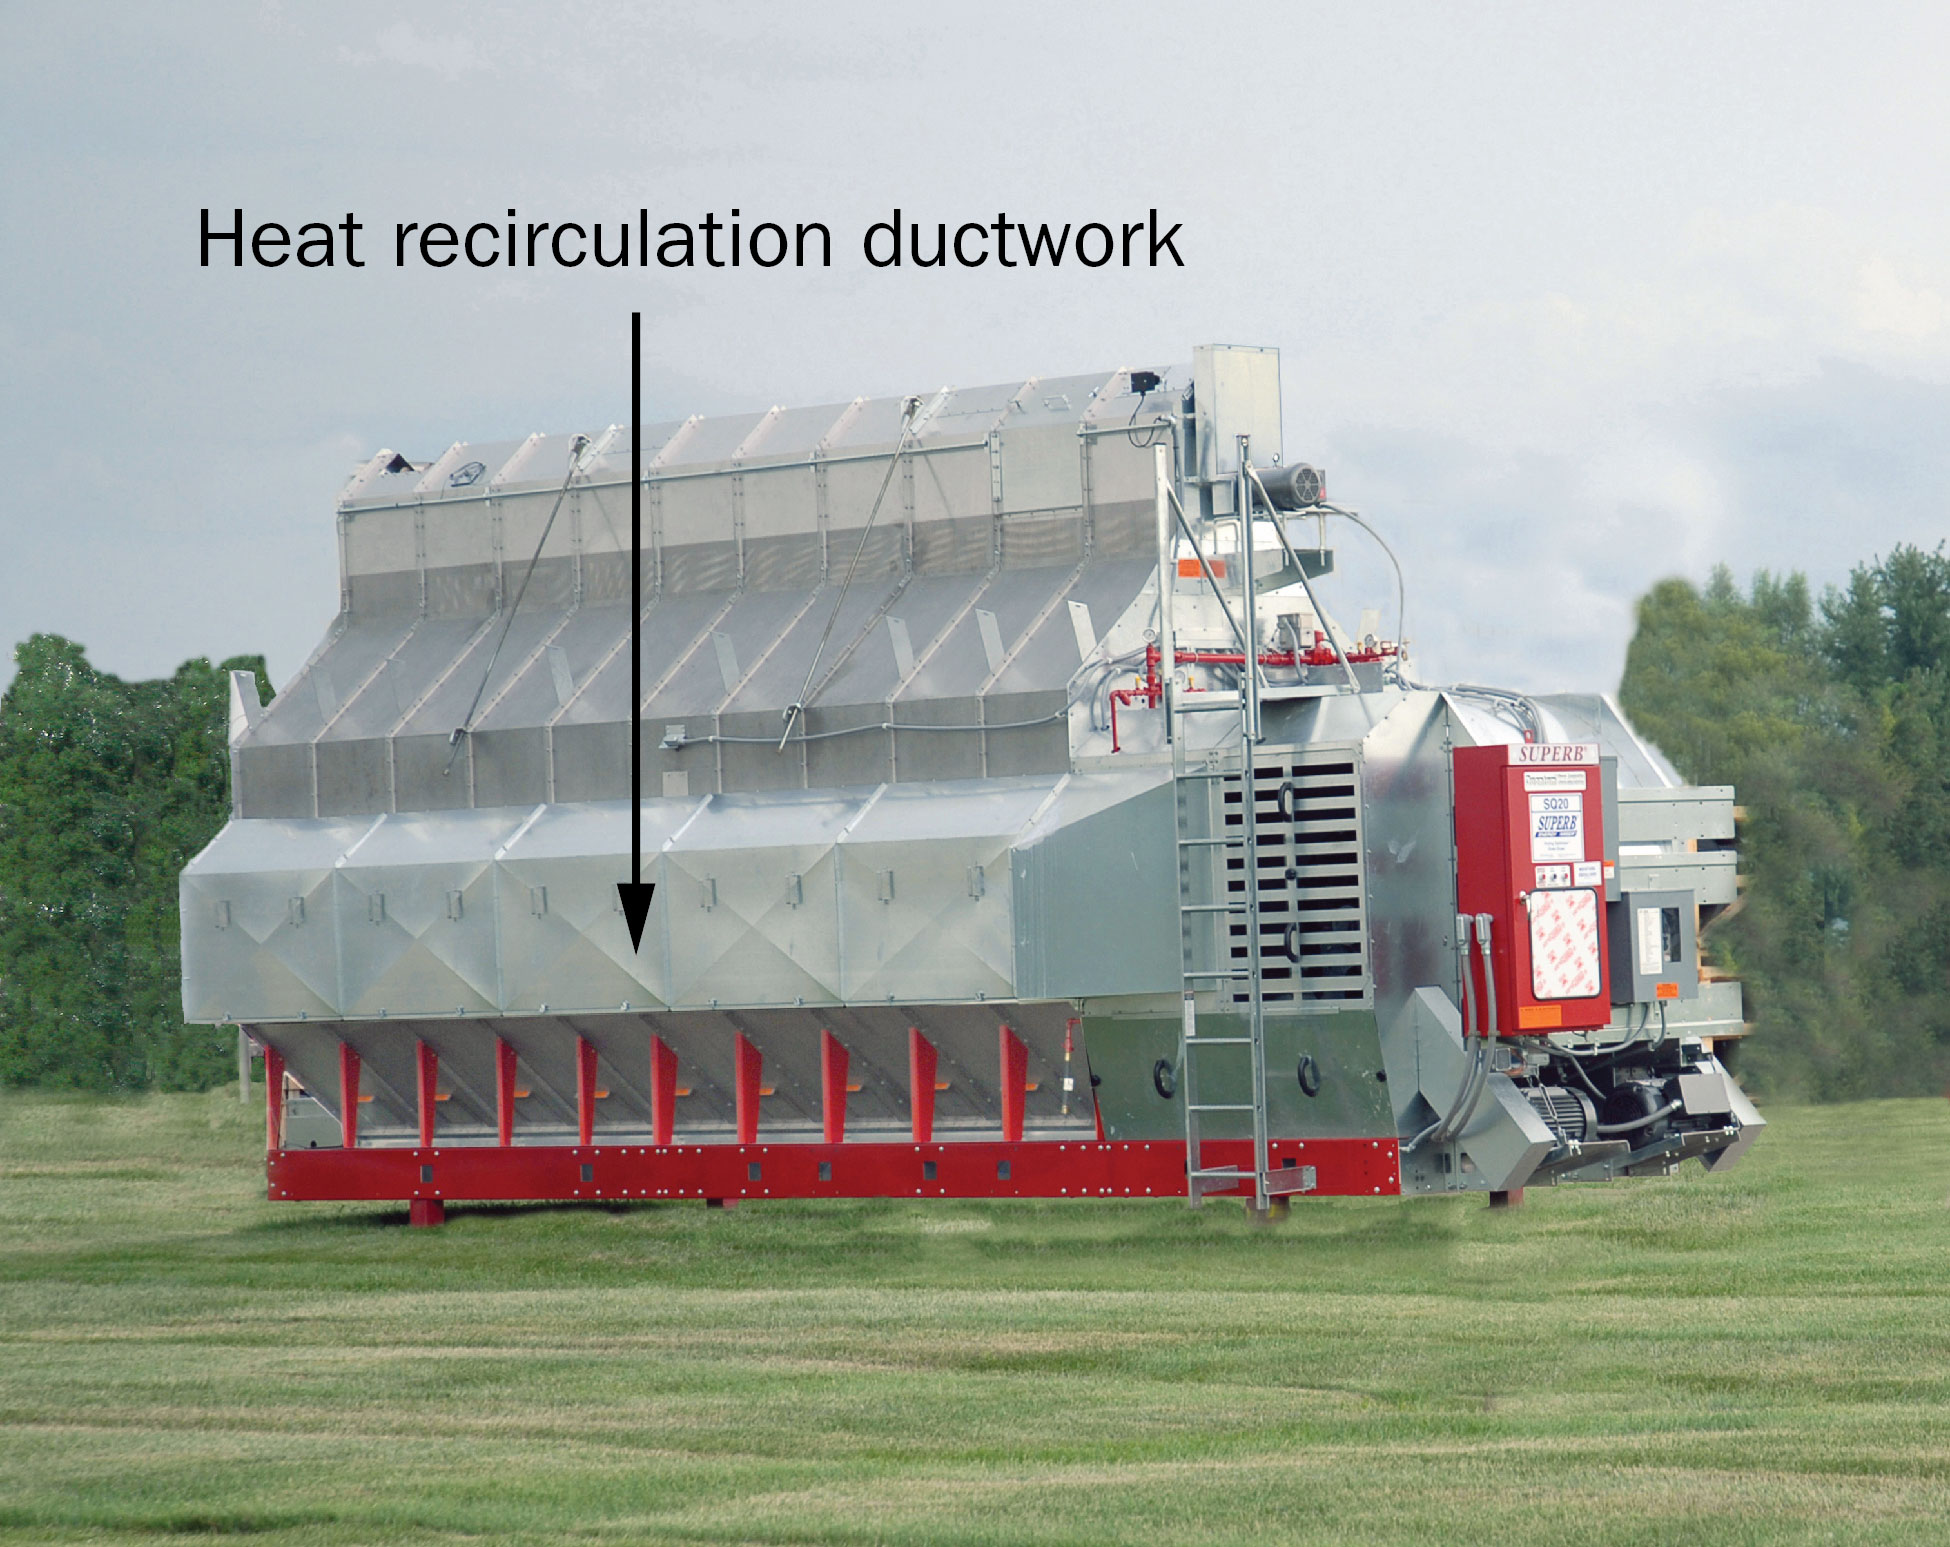 Horizontal continuous cross-flow grain dryer with factory-installed heat recirculation ductwork